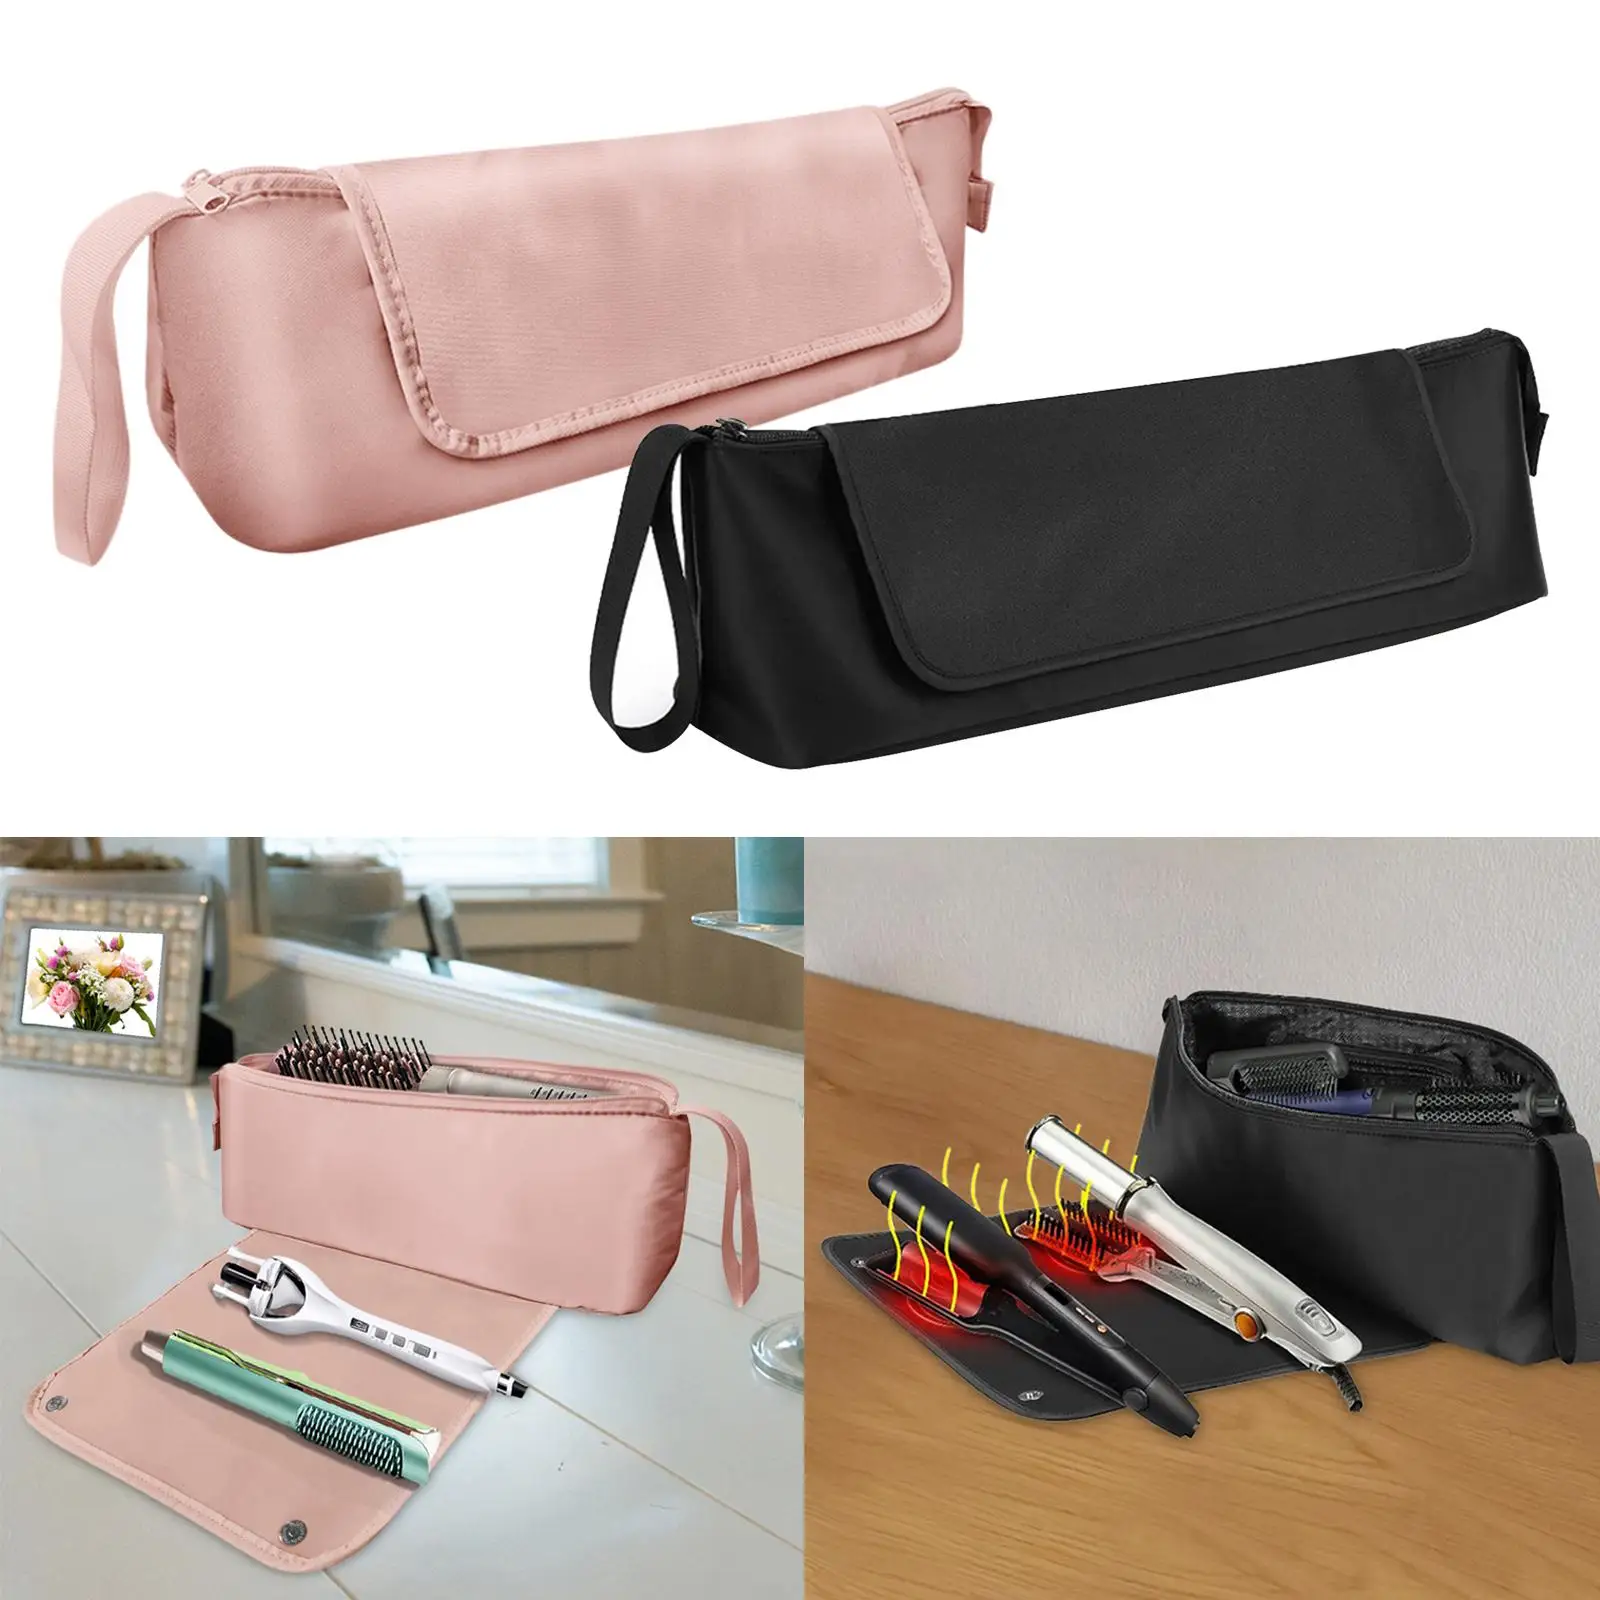 Hair Styling Accessory Organizer Curling Iron Travel Case with Mat for Haircare Accessories Travel Essentials Styling Irons Home